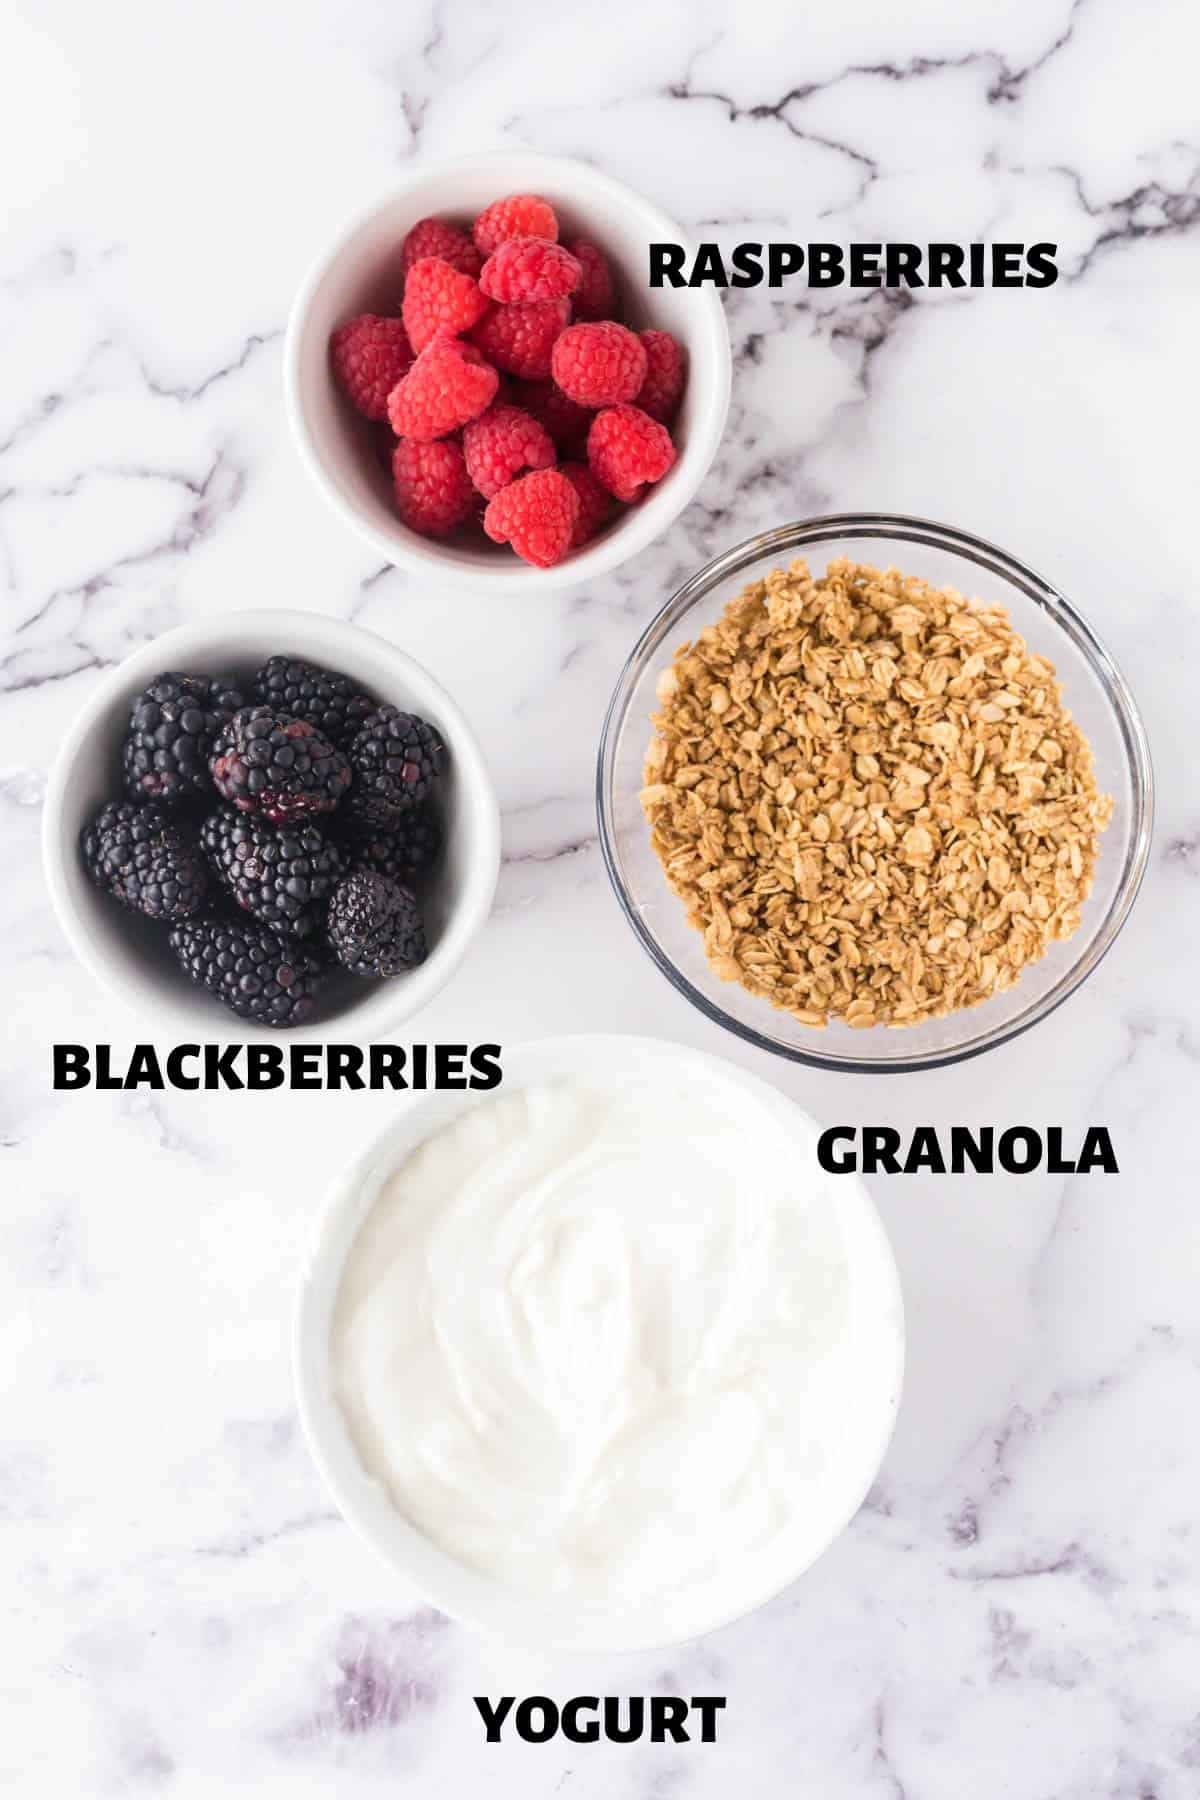 A labeled image of ingredients need to make a berry yogurt parfait.